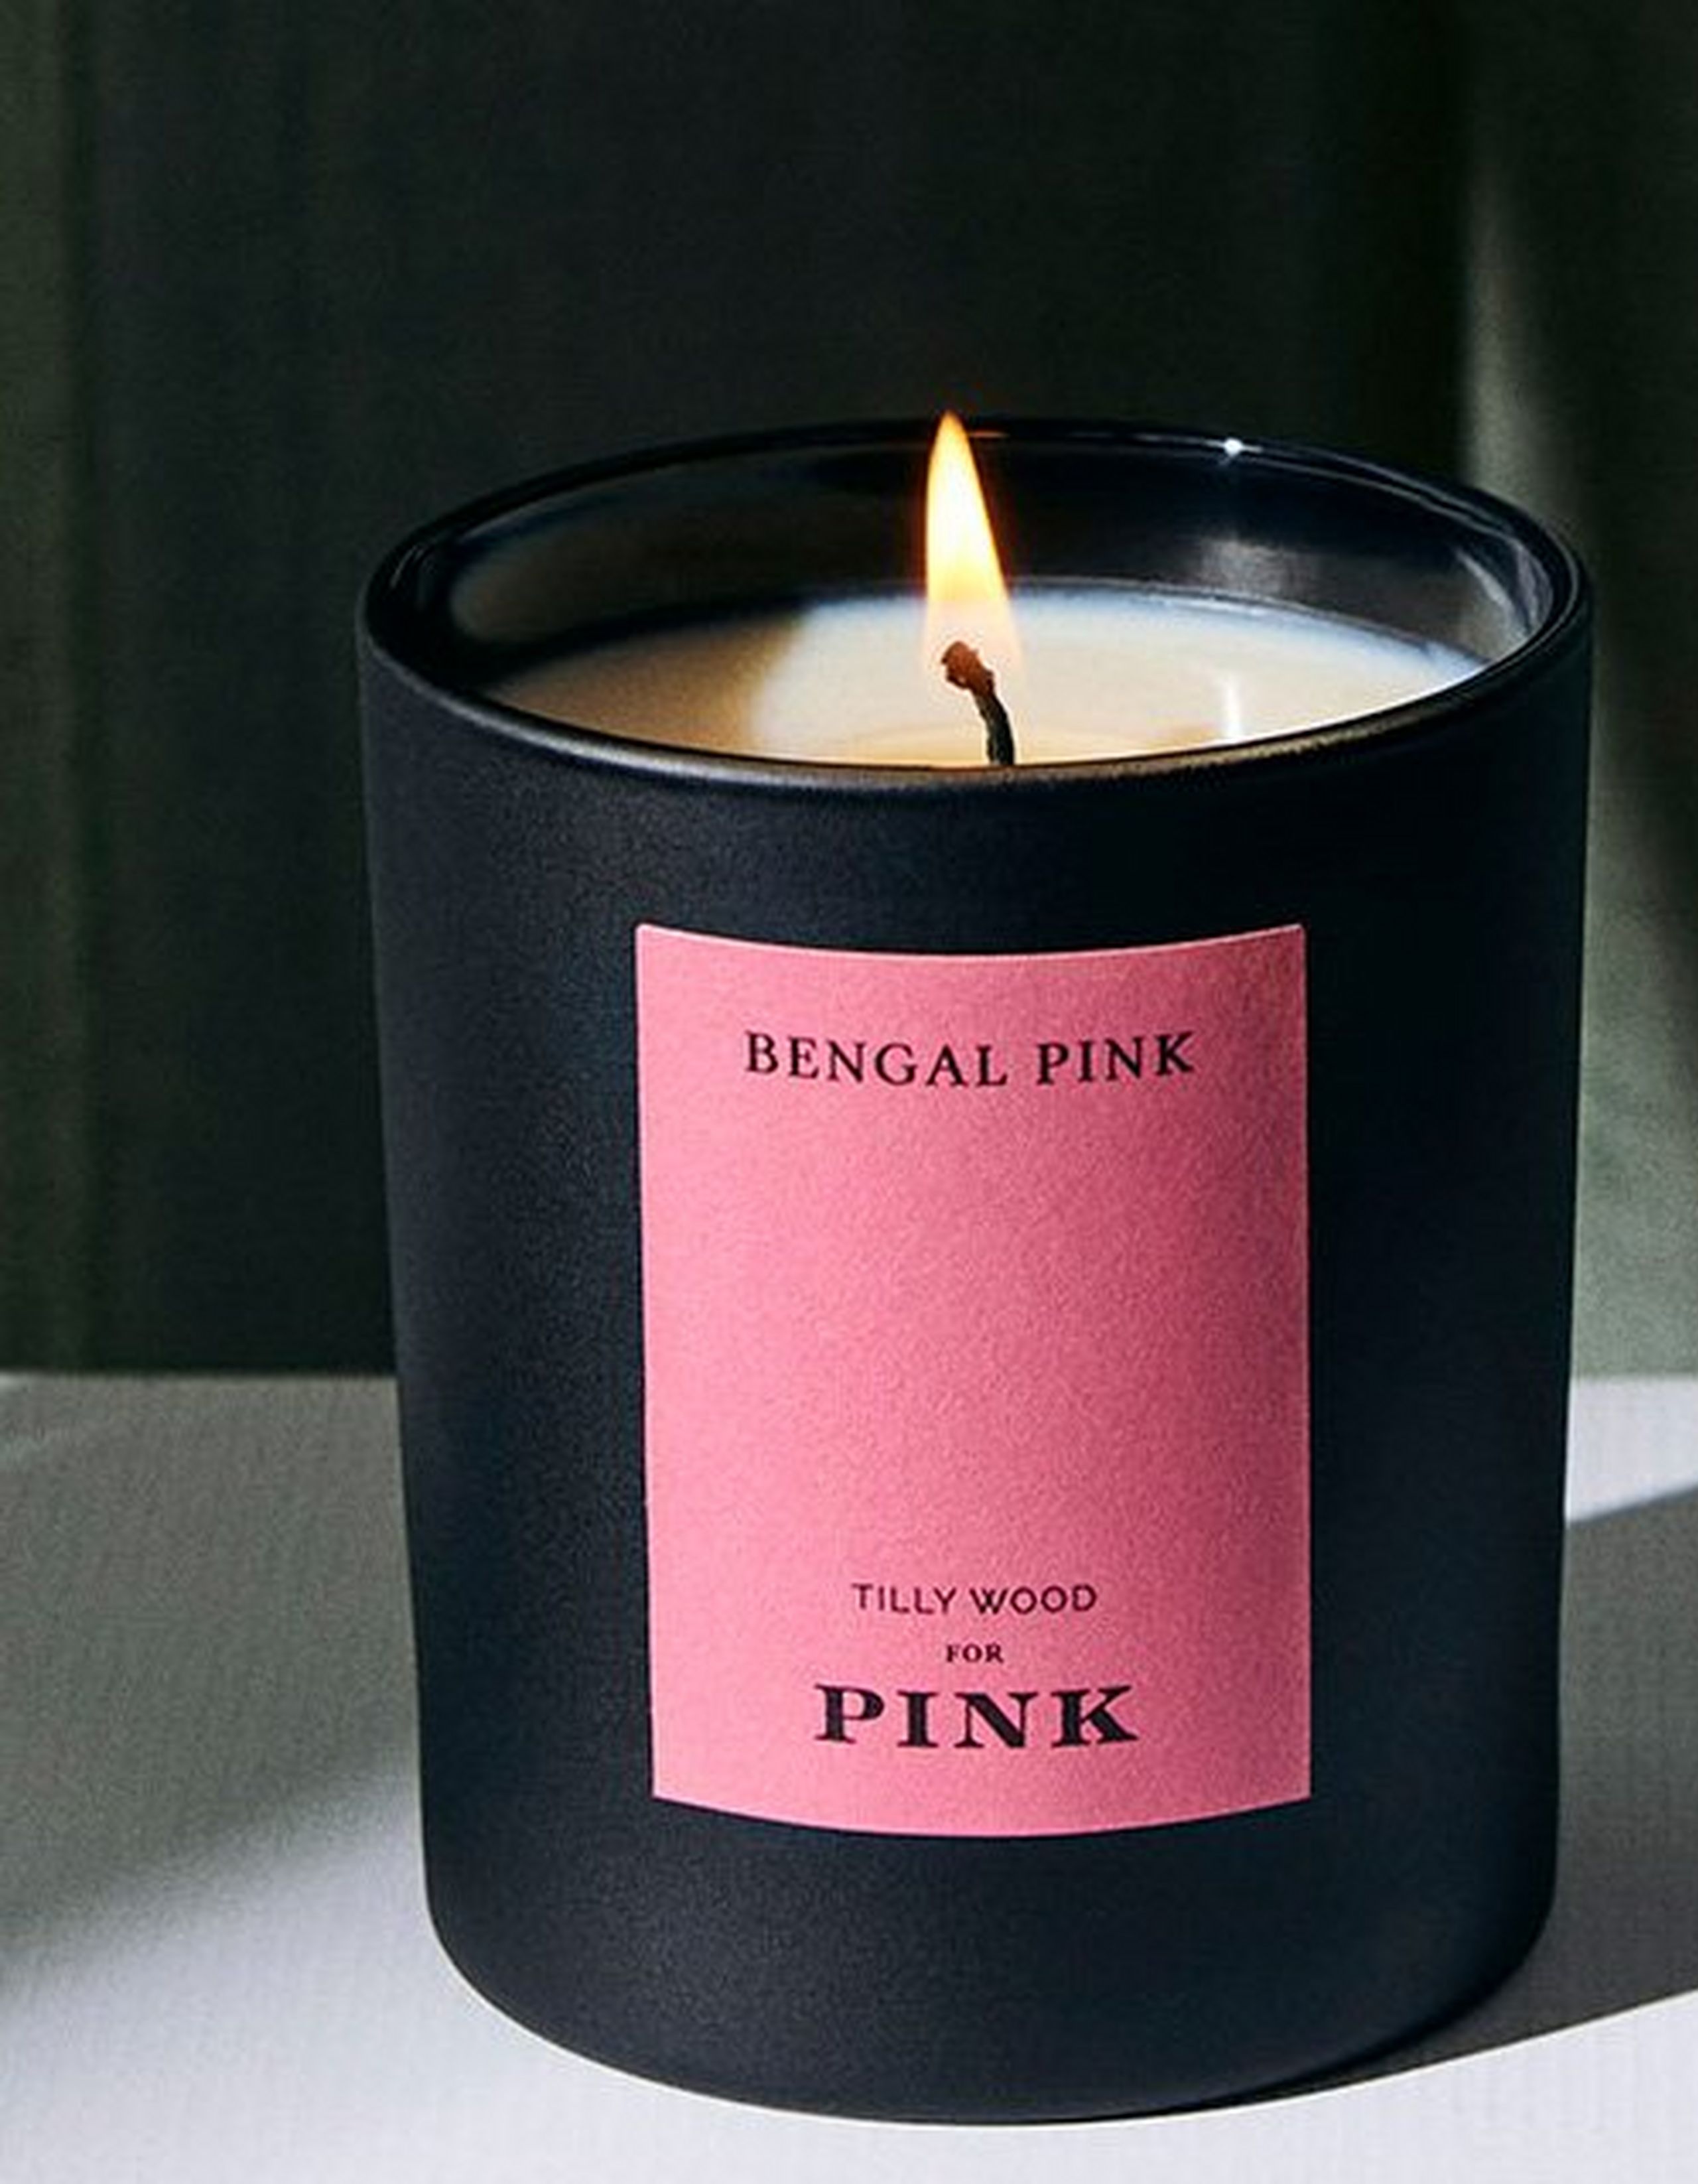 A lit candle with a pink label on it